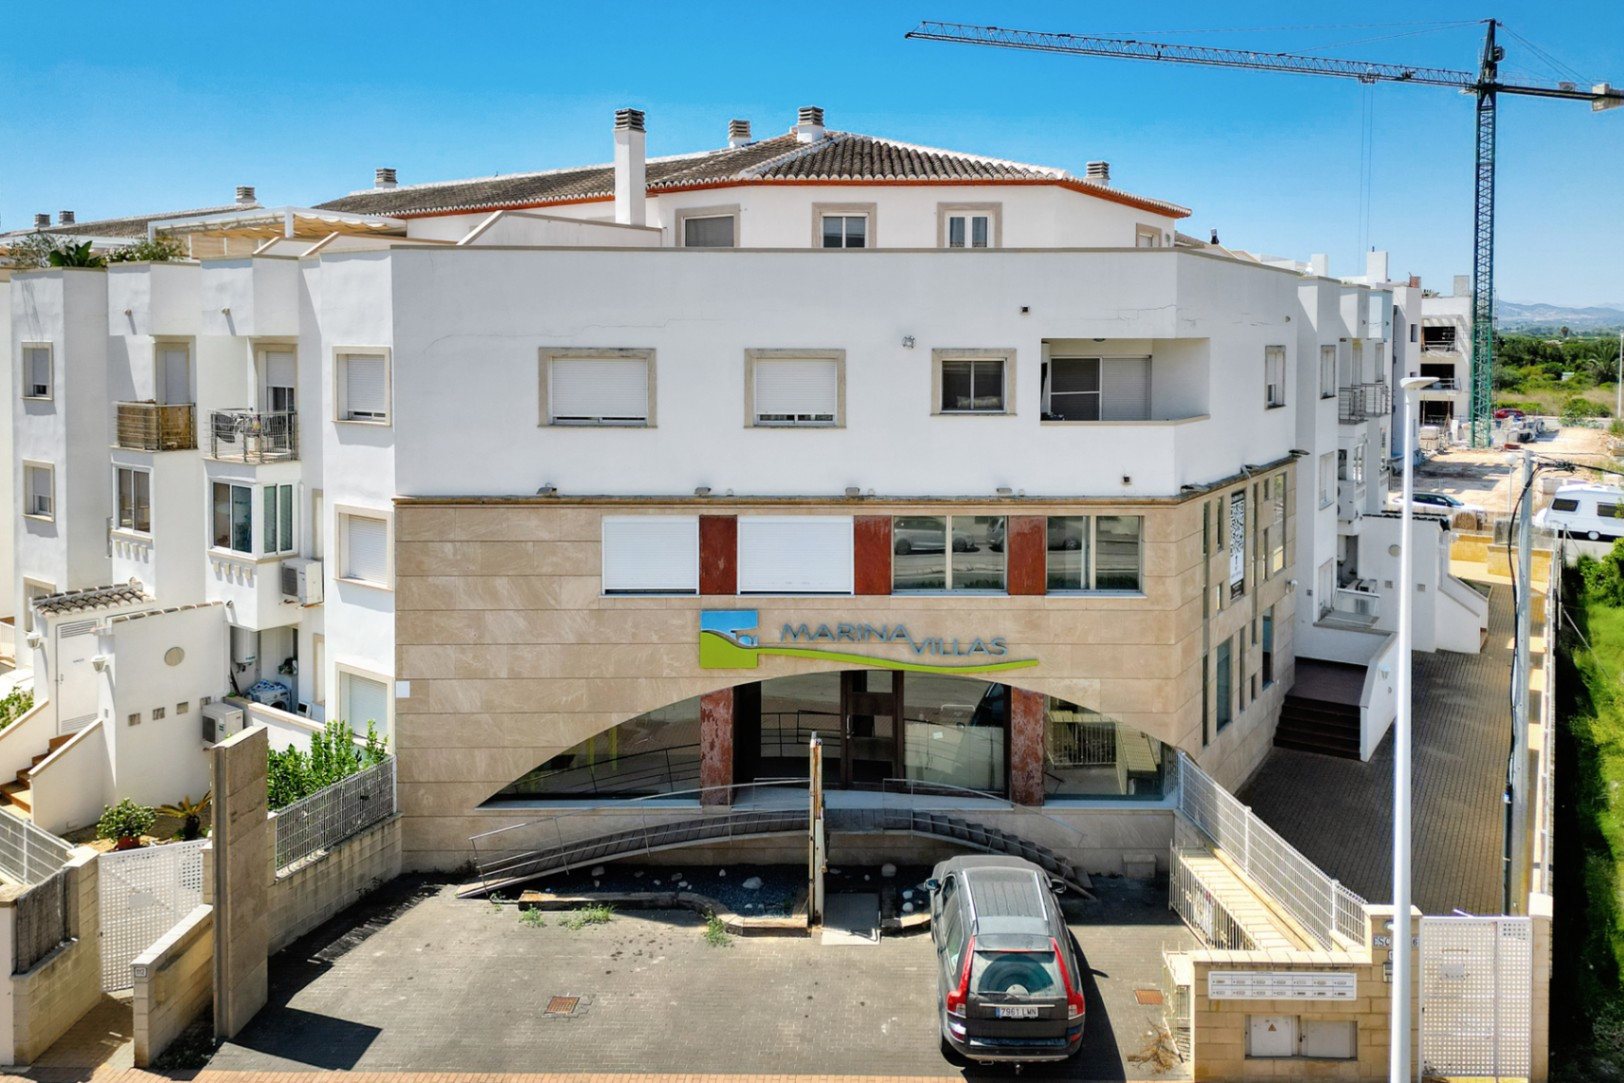 Commercial property in Javea